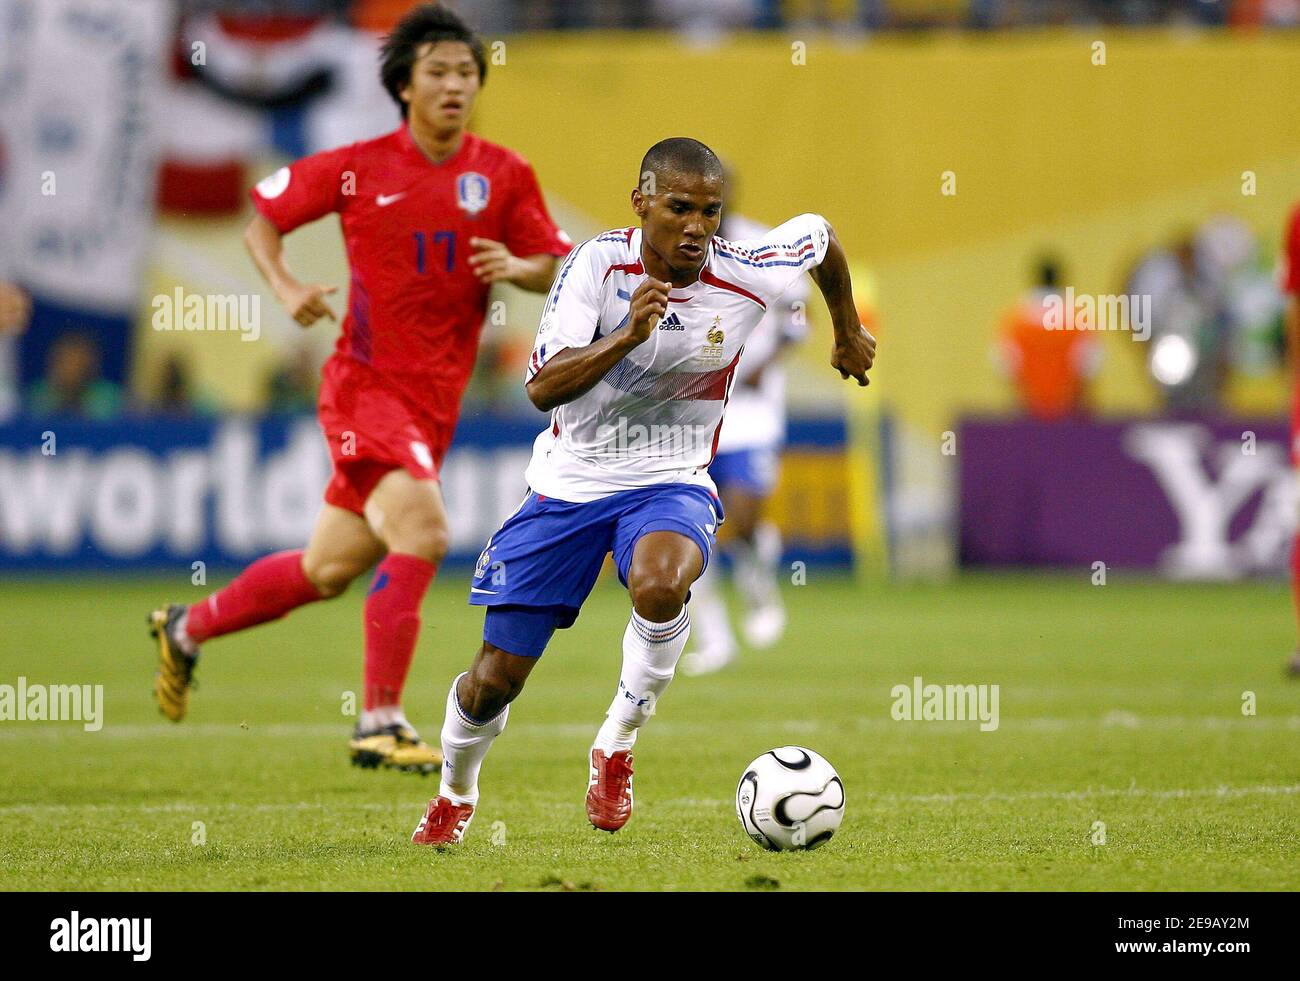 France's Florent Malouda in action during the World Cup 2006, Group G France vs South Korea, in Leipzig, Germany, on June 18, 2006. The game ended in draw 1-1. Photo by Christian Liewig/ABACAPRESS.COM Stock Photo